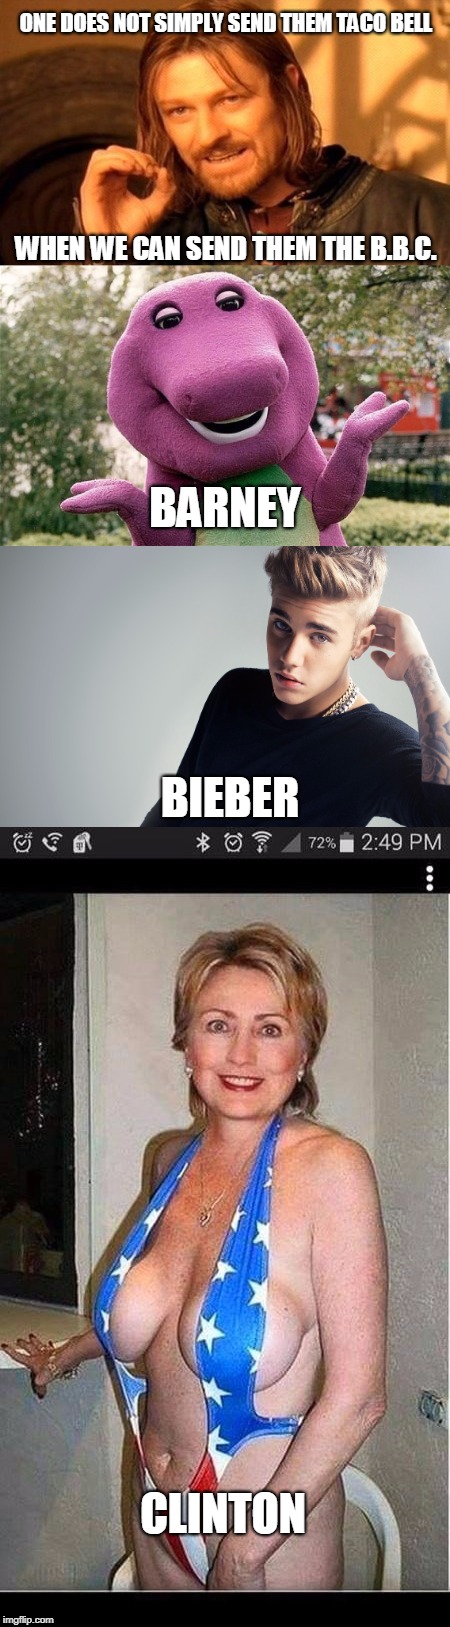 ONE DOES NOT SIMPLY SEND THEM TACO BELL WHEN WE CAN SEND THEM THE B.B.C. BARNEY BIEBER CLINTON | made w/ Imgflip meme maker